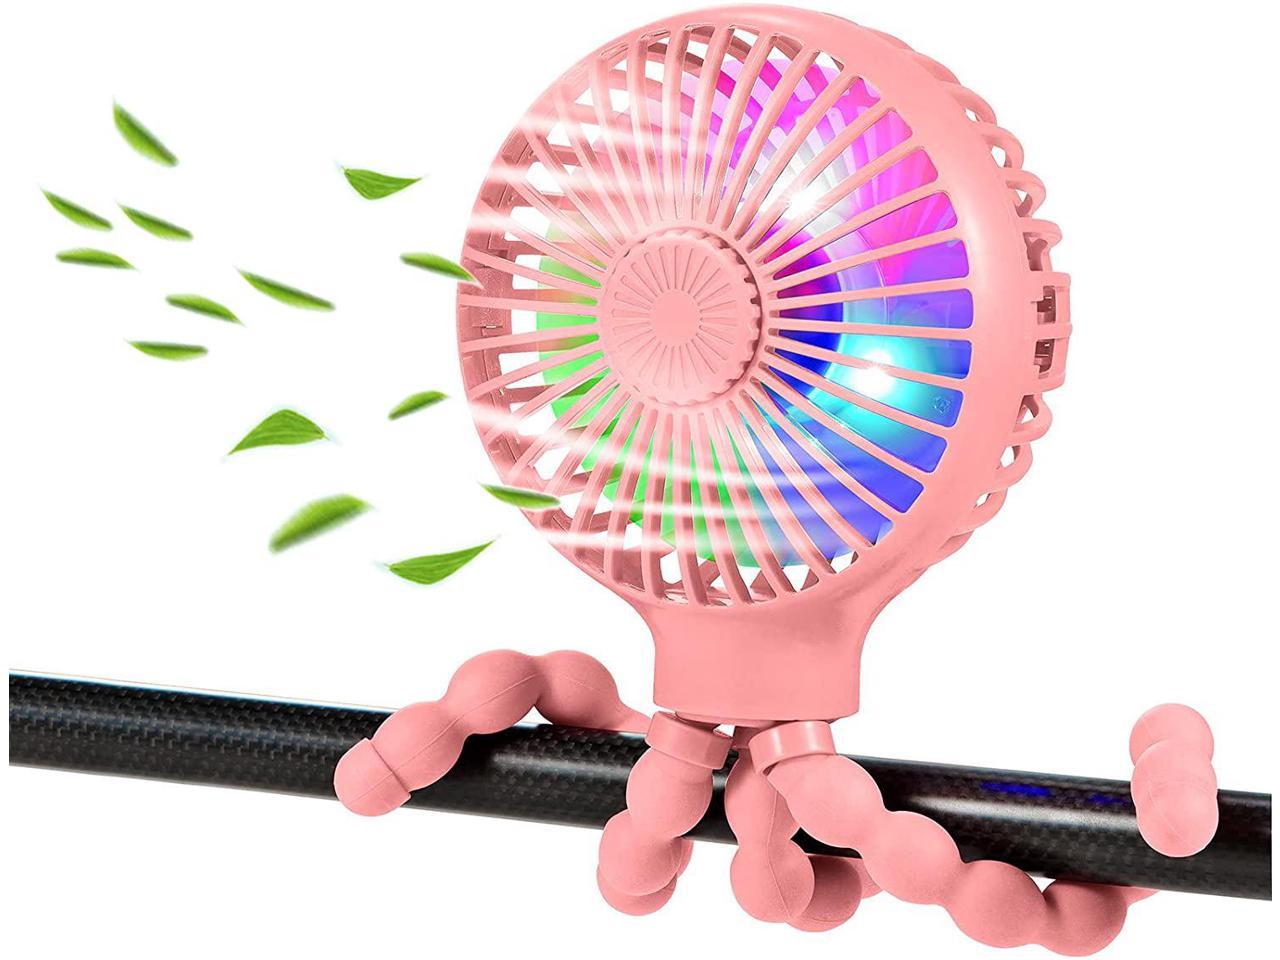 USB Fan  Personal Portable plugs into any USB no battery needed Flexable stem 